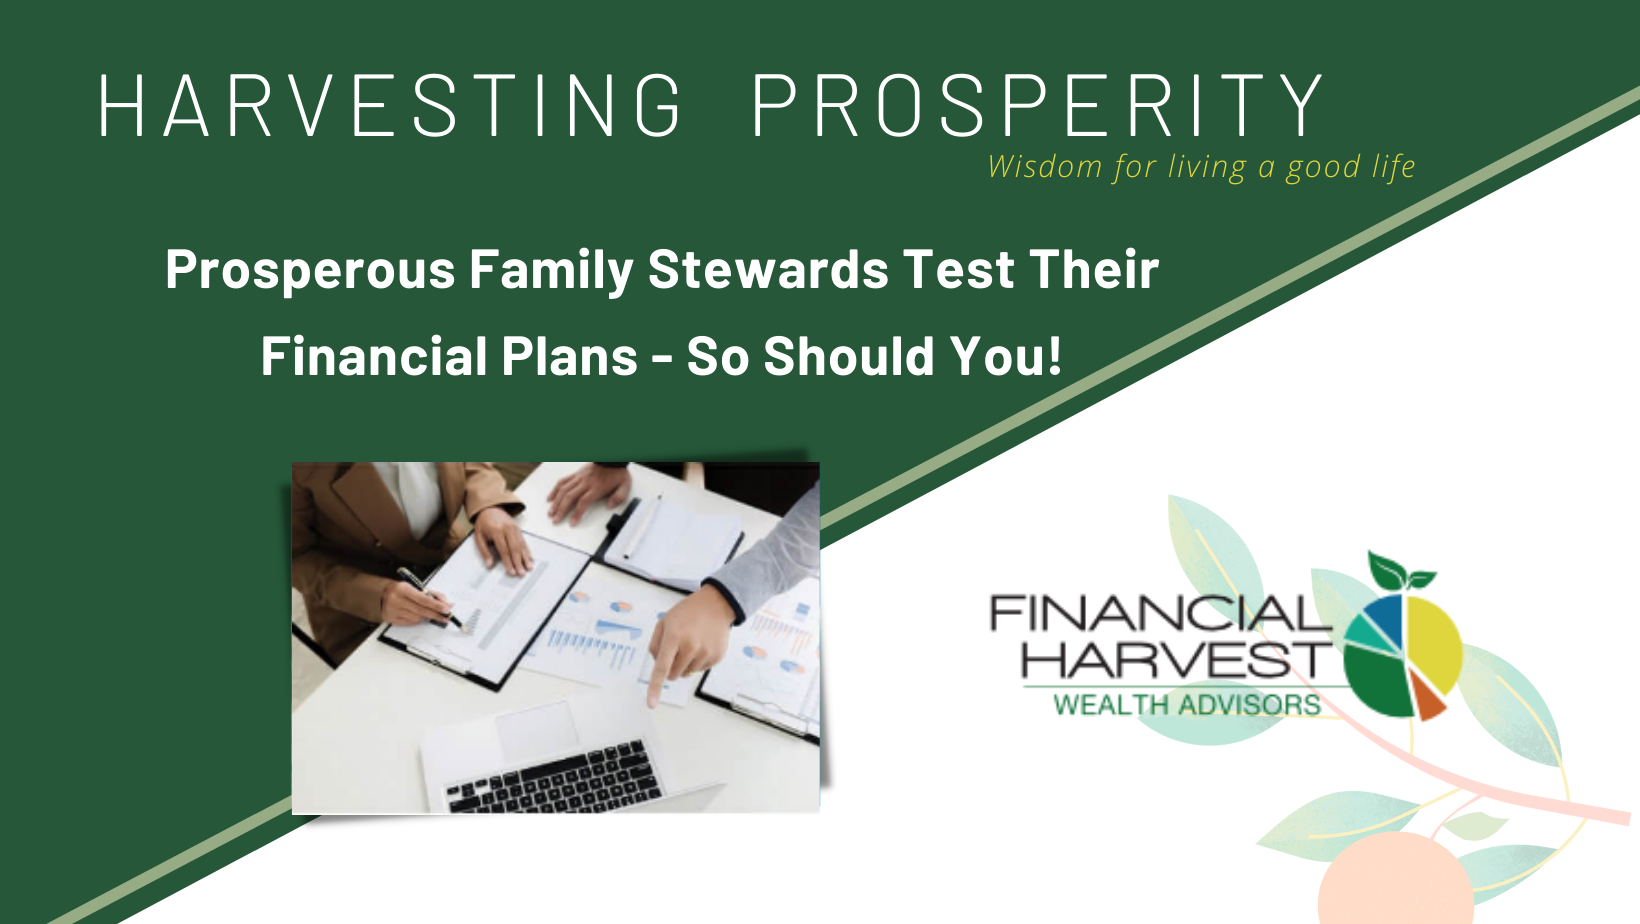 Prosperous family stewards test their financial plans - so should you